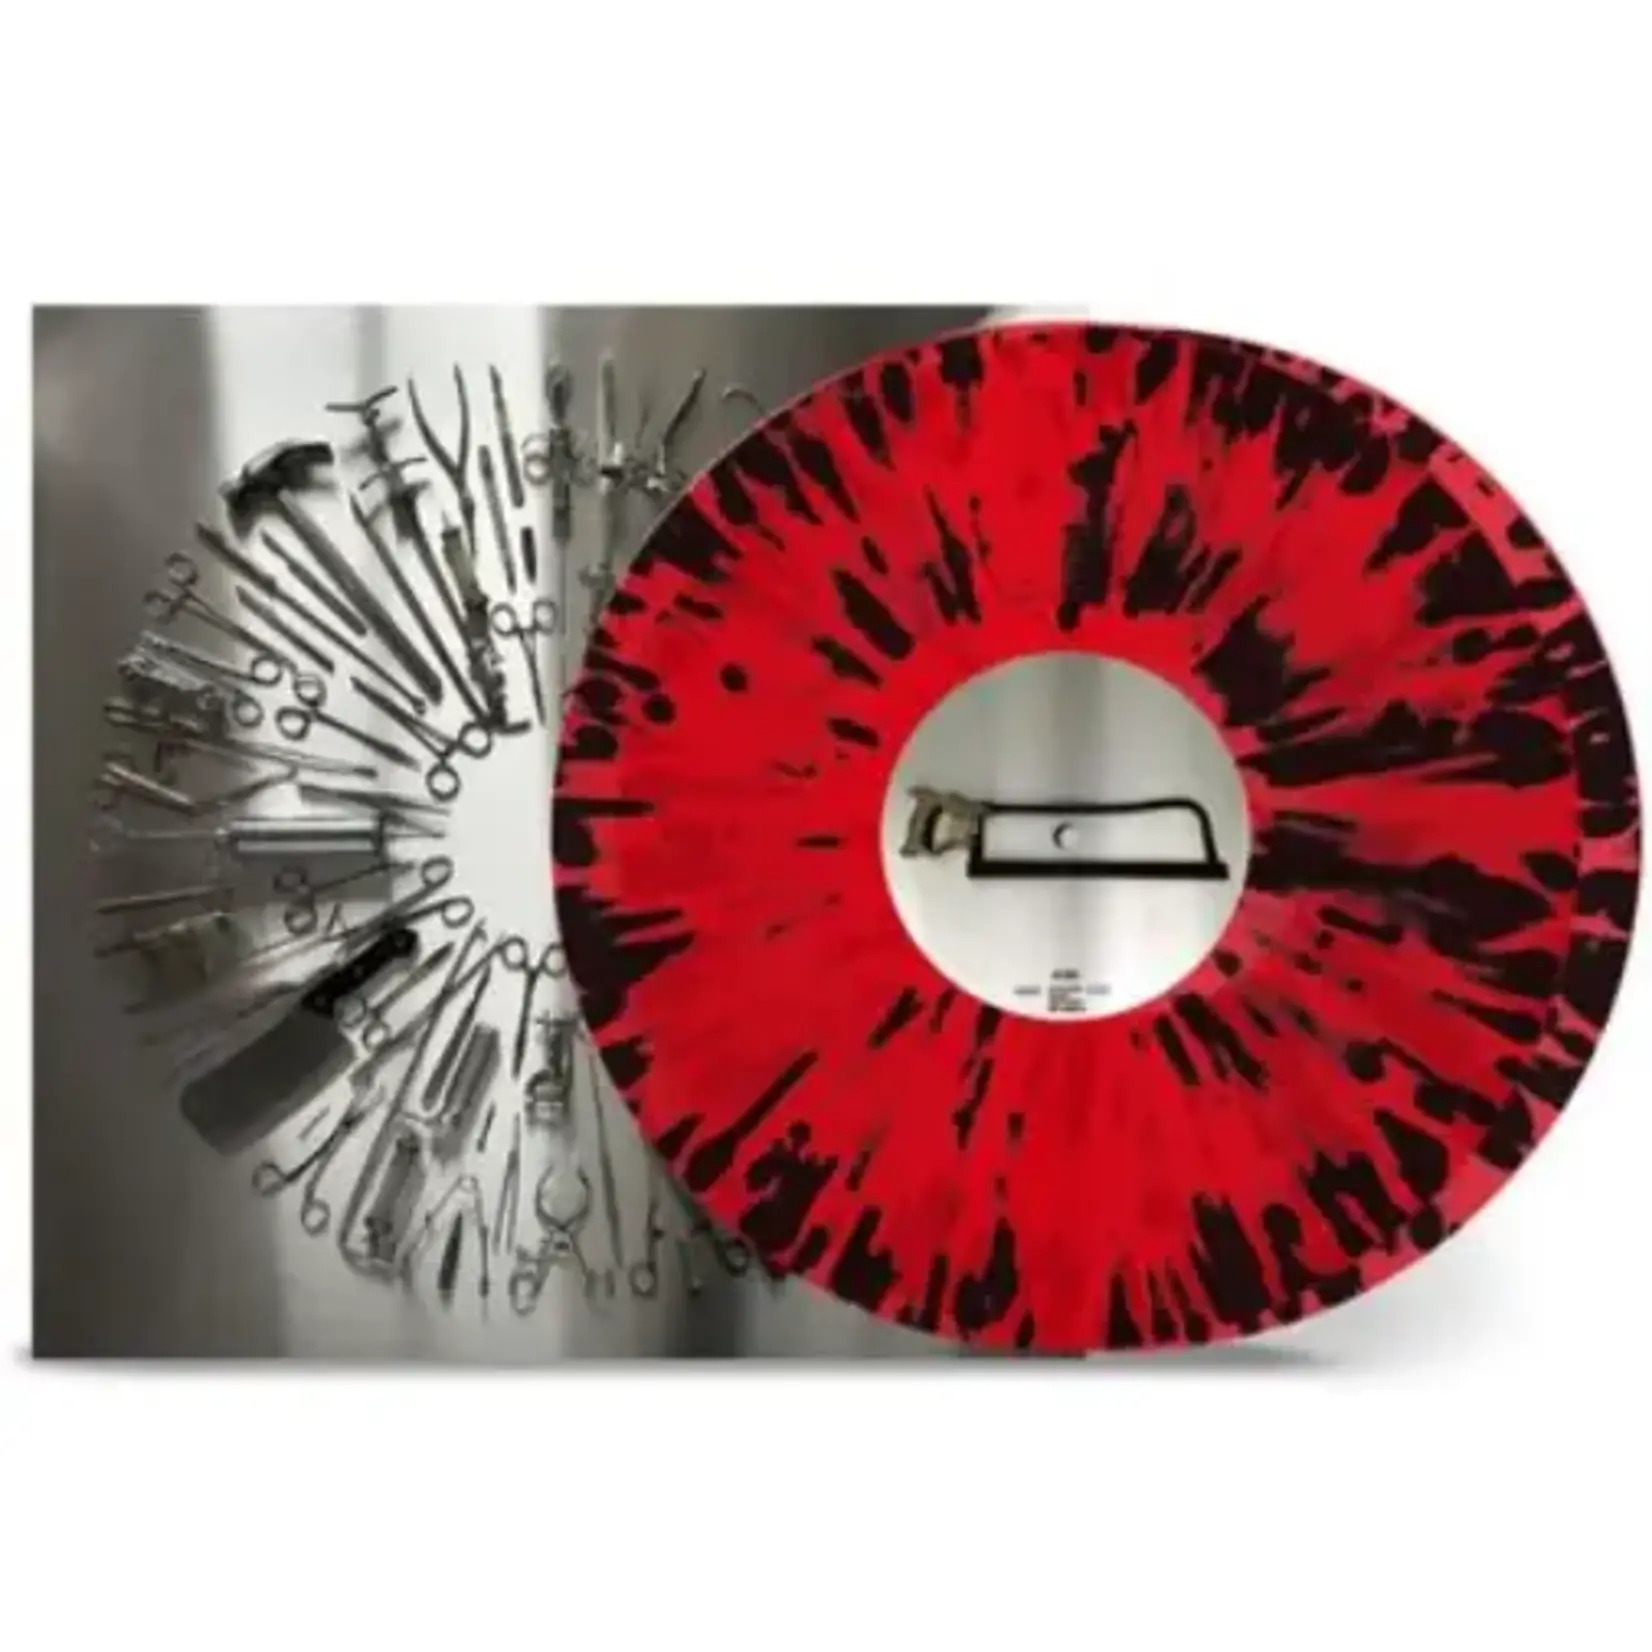 [New] Carcass - Surgical Steel (2LP, 10th anniversary edition, red vinyl with black splatter)